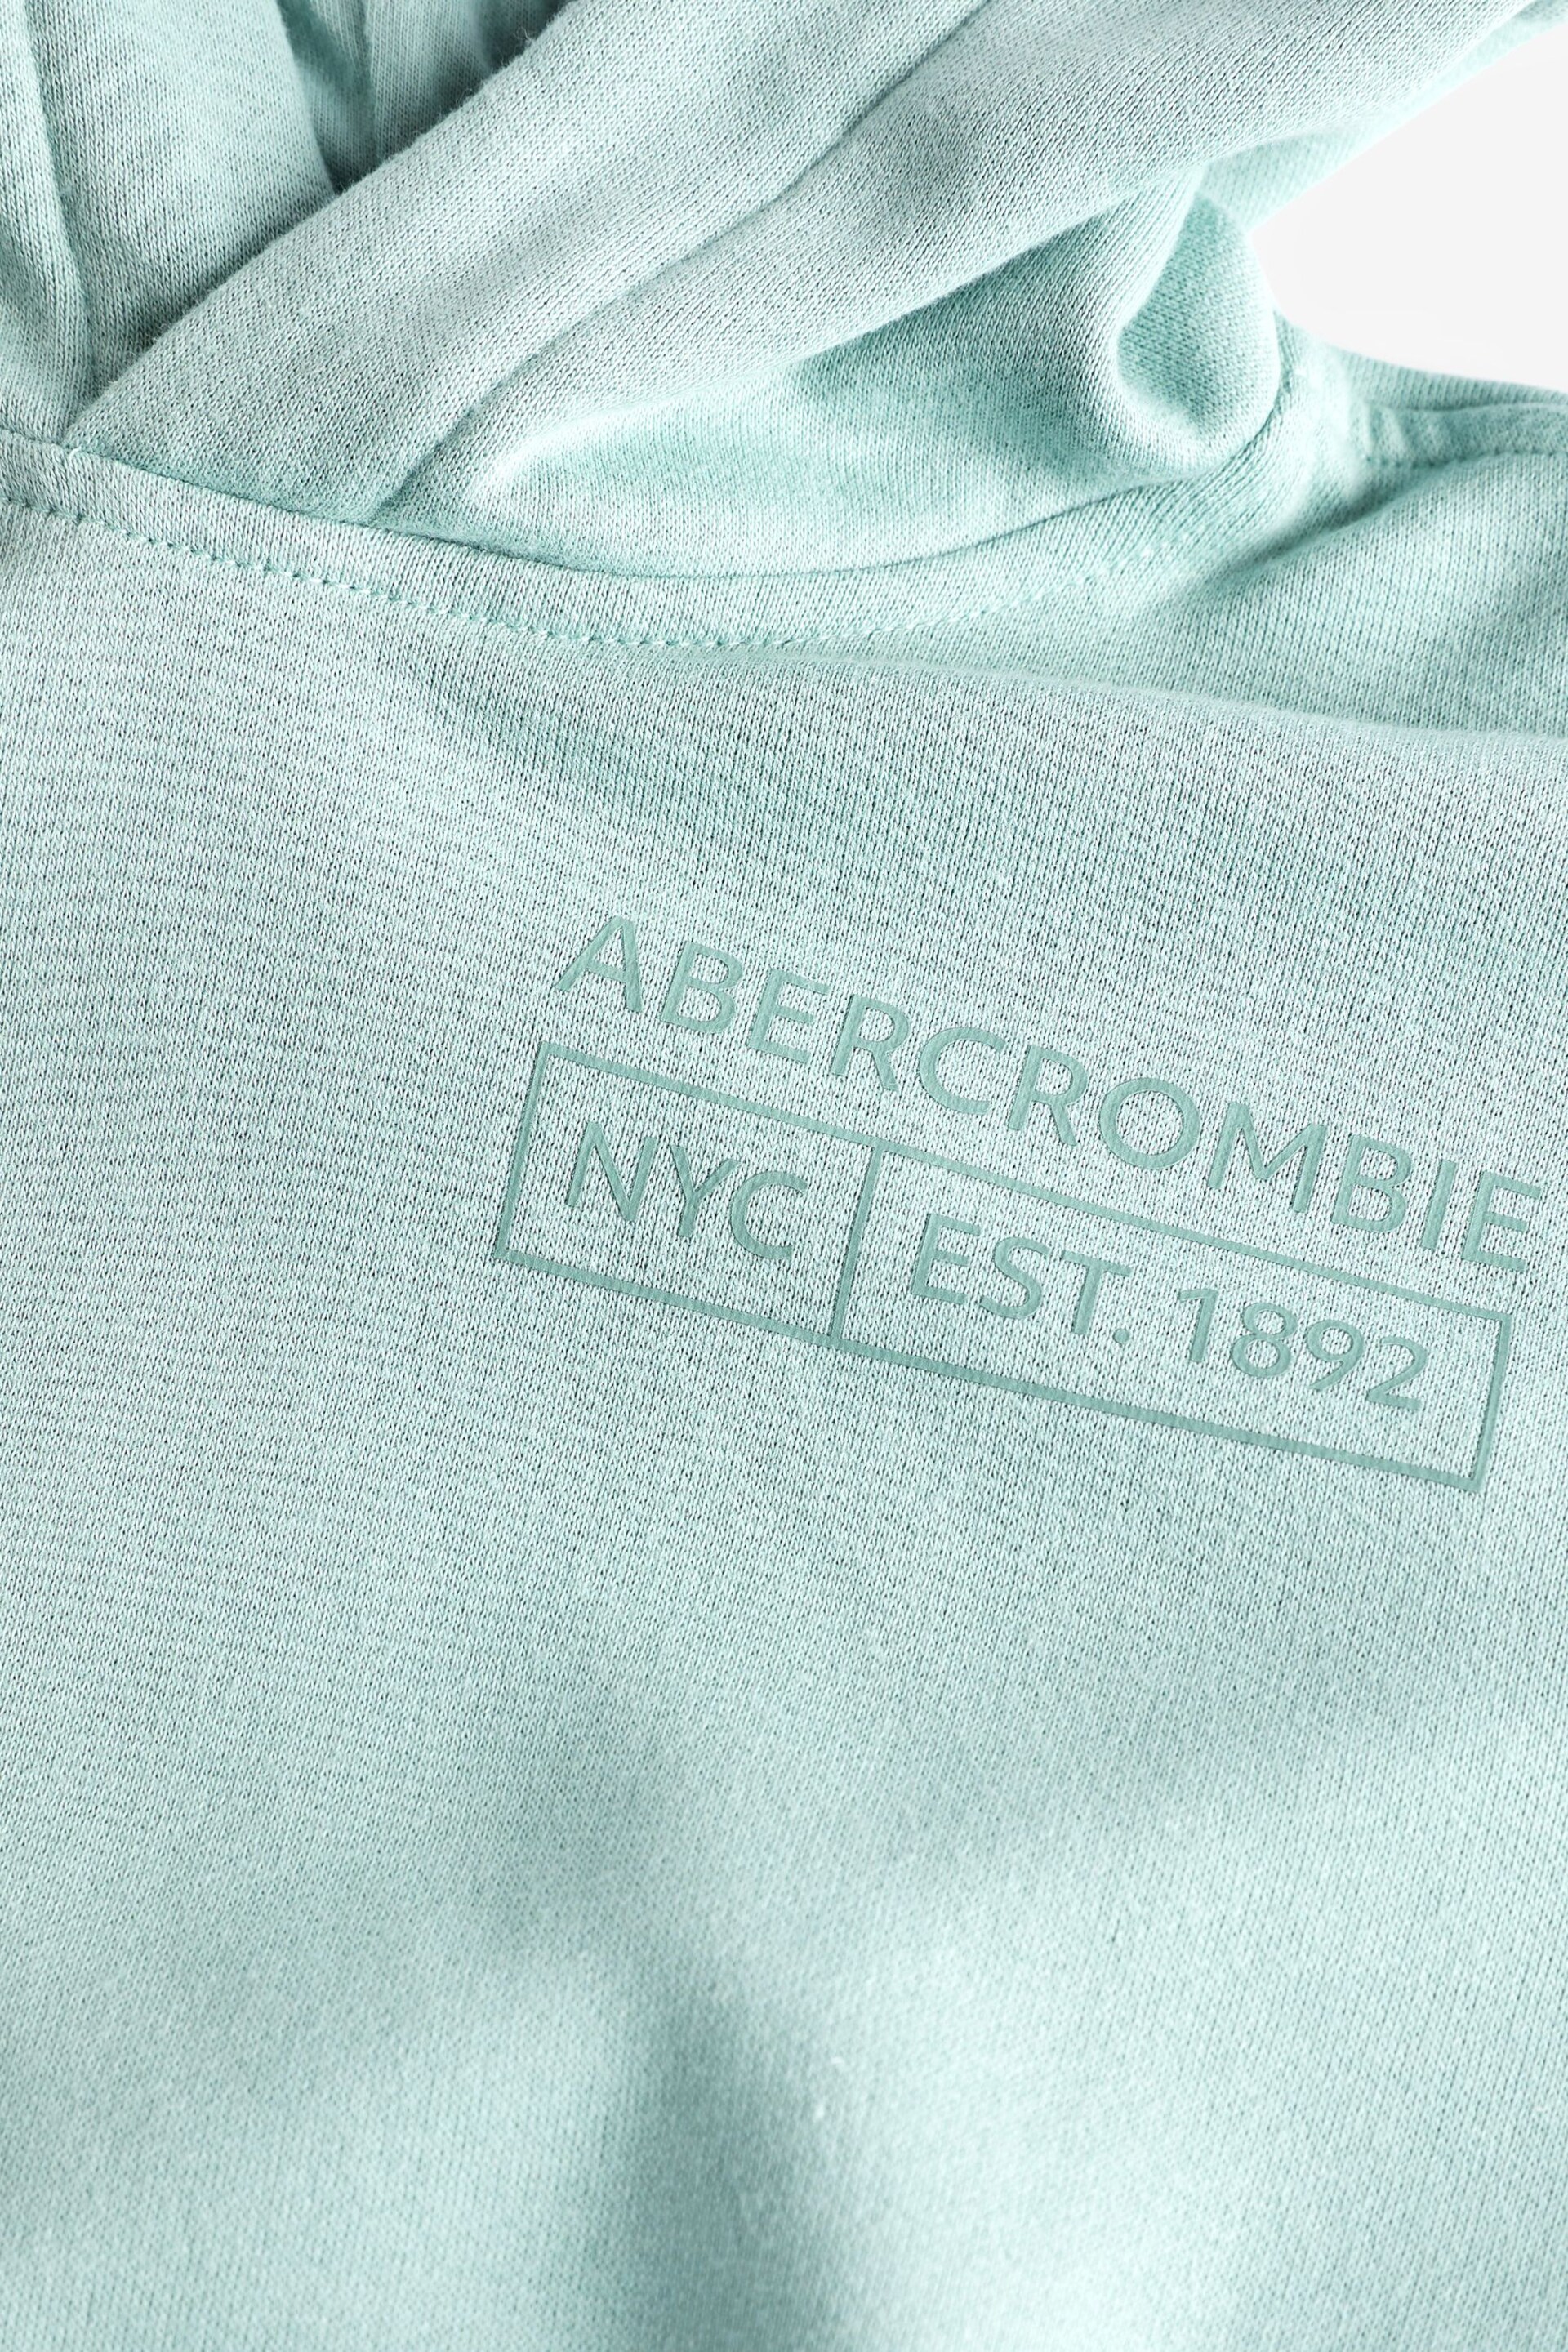 Abercrombie & Fitch Blue Relaxed Fit Graphic Hoodie - Image 4 of 4